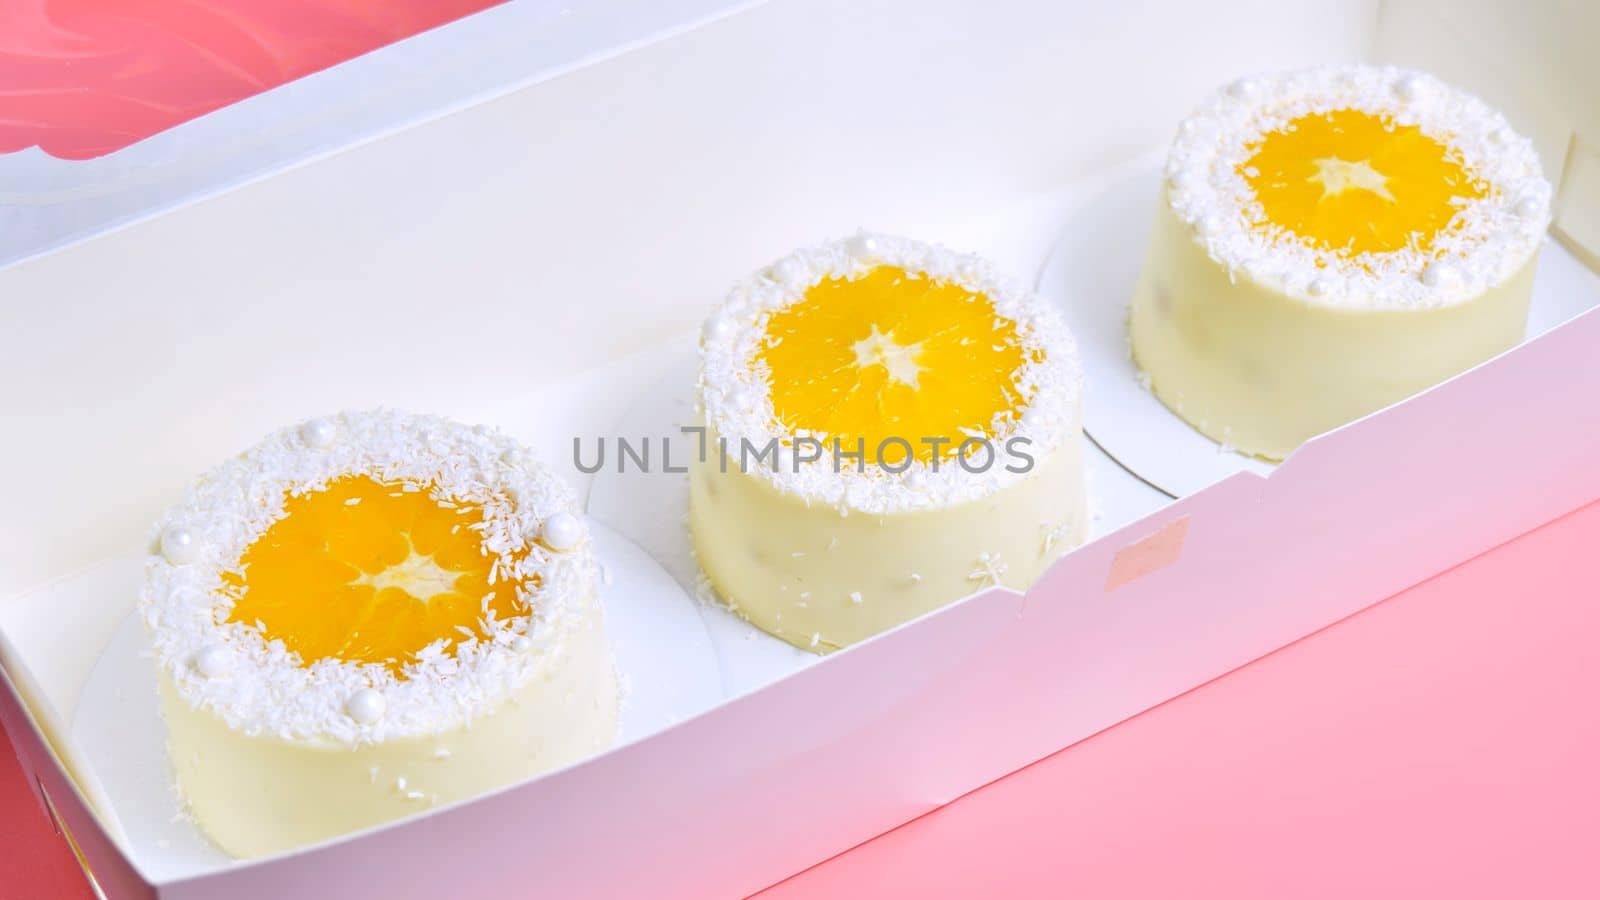 Small cakes with orange and coconut shavings in a box